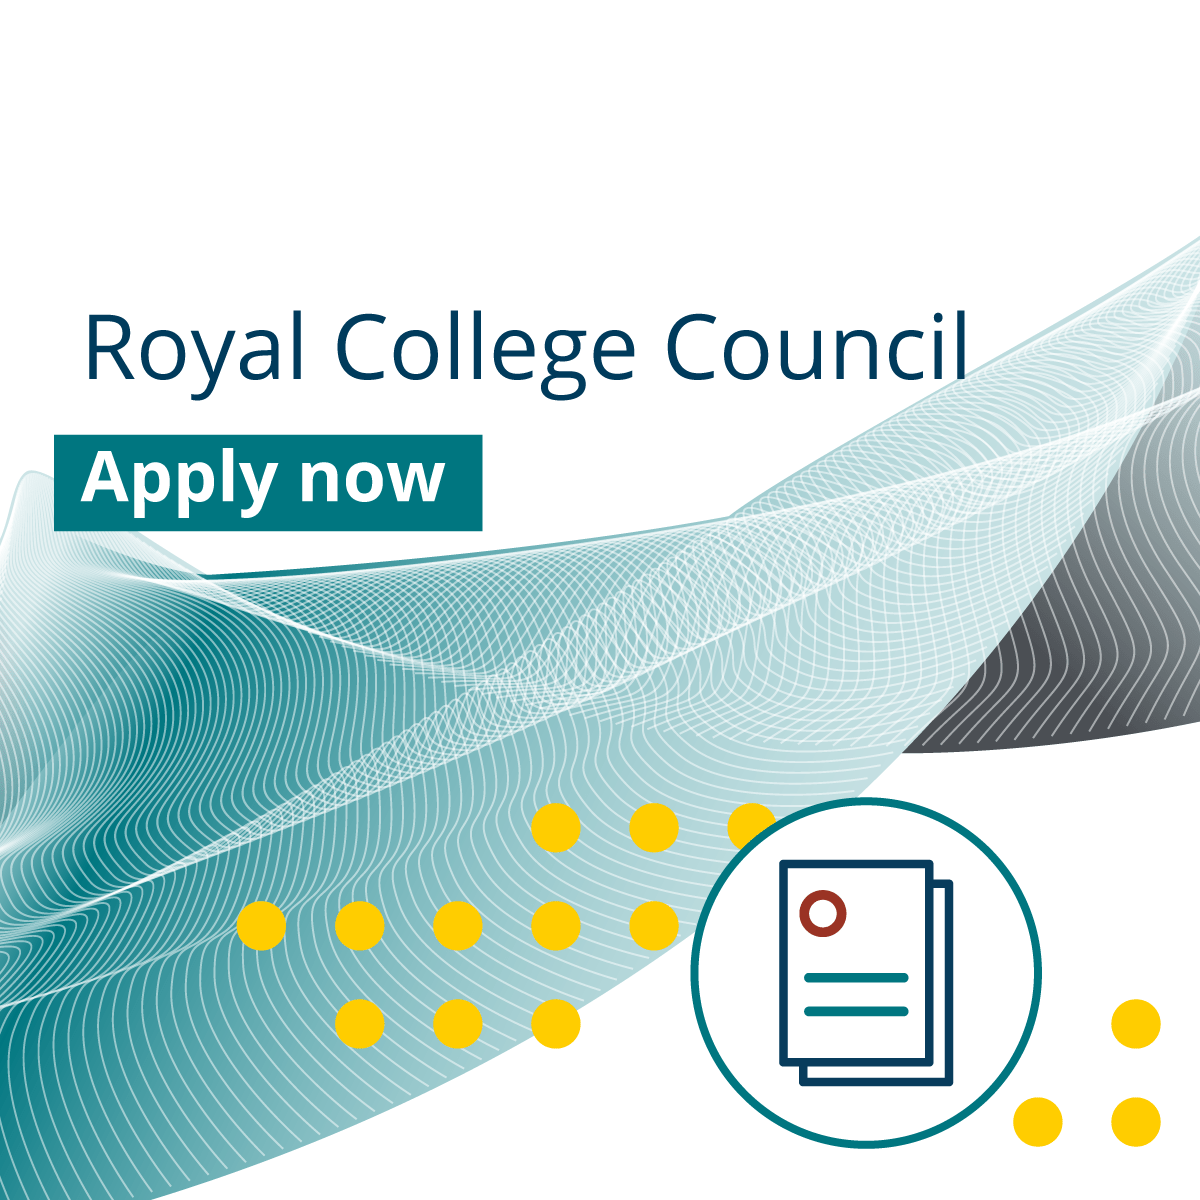 Royal College Council. Apply now